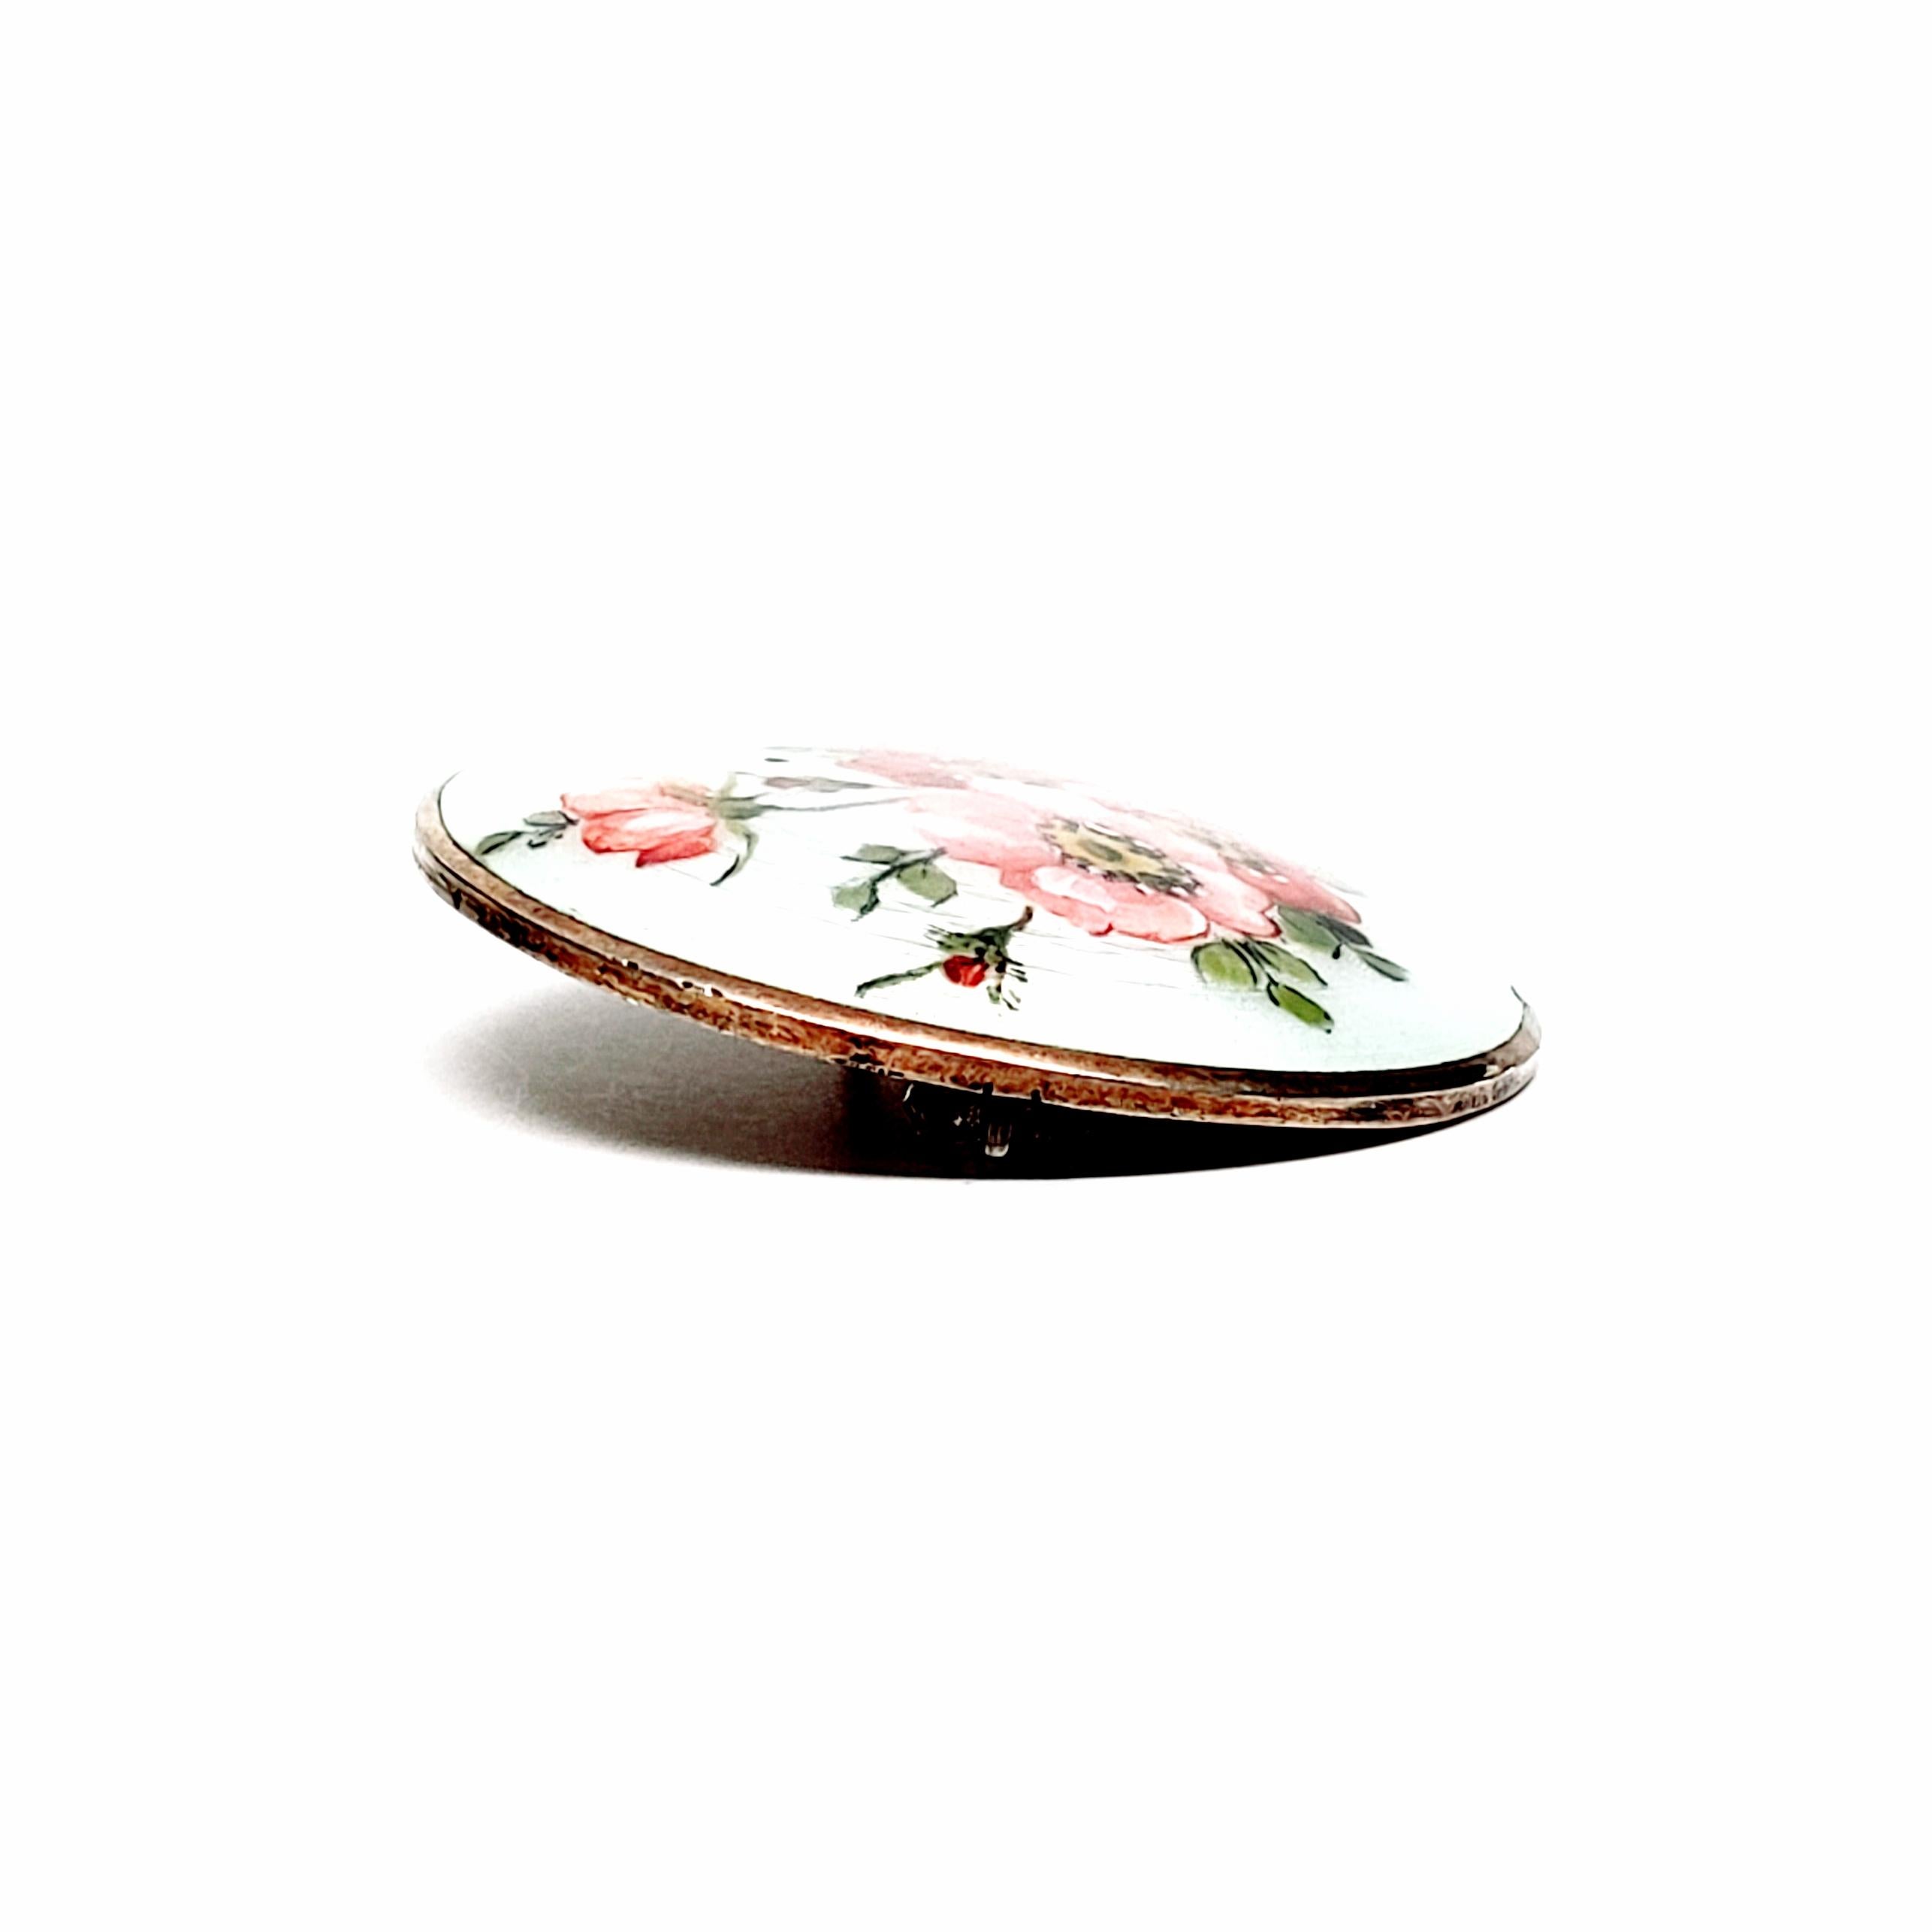 Gold vermeil over sterling silver round enameled pin with flowers by Aksel Holmsen, circa 1950s.

Beautiful white guillouche enamel painted with pink flowers and green leaves.

Measures approx 1 1/2